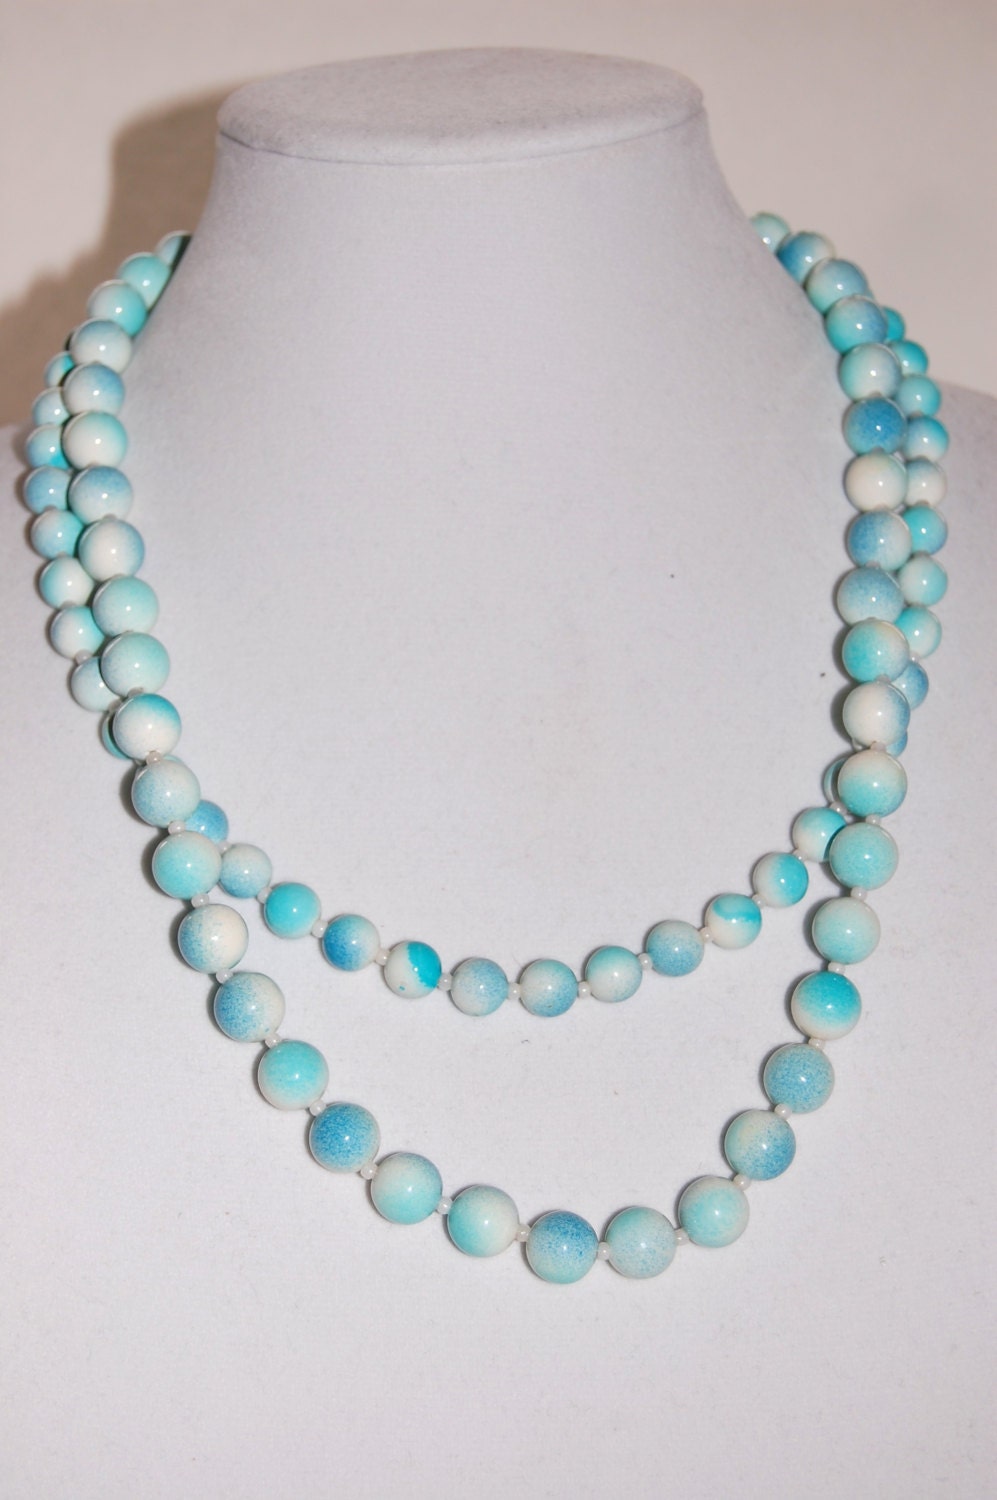 SALE Vintage 1960's Blue Beaded Necklace Layered